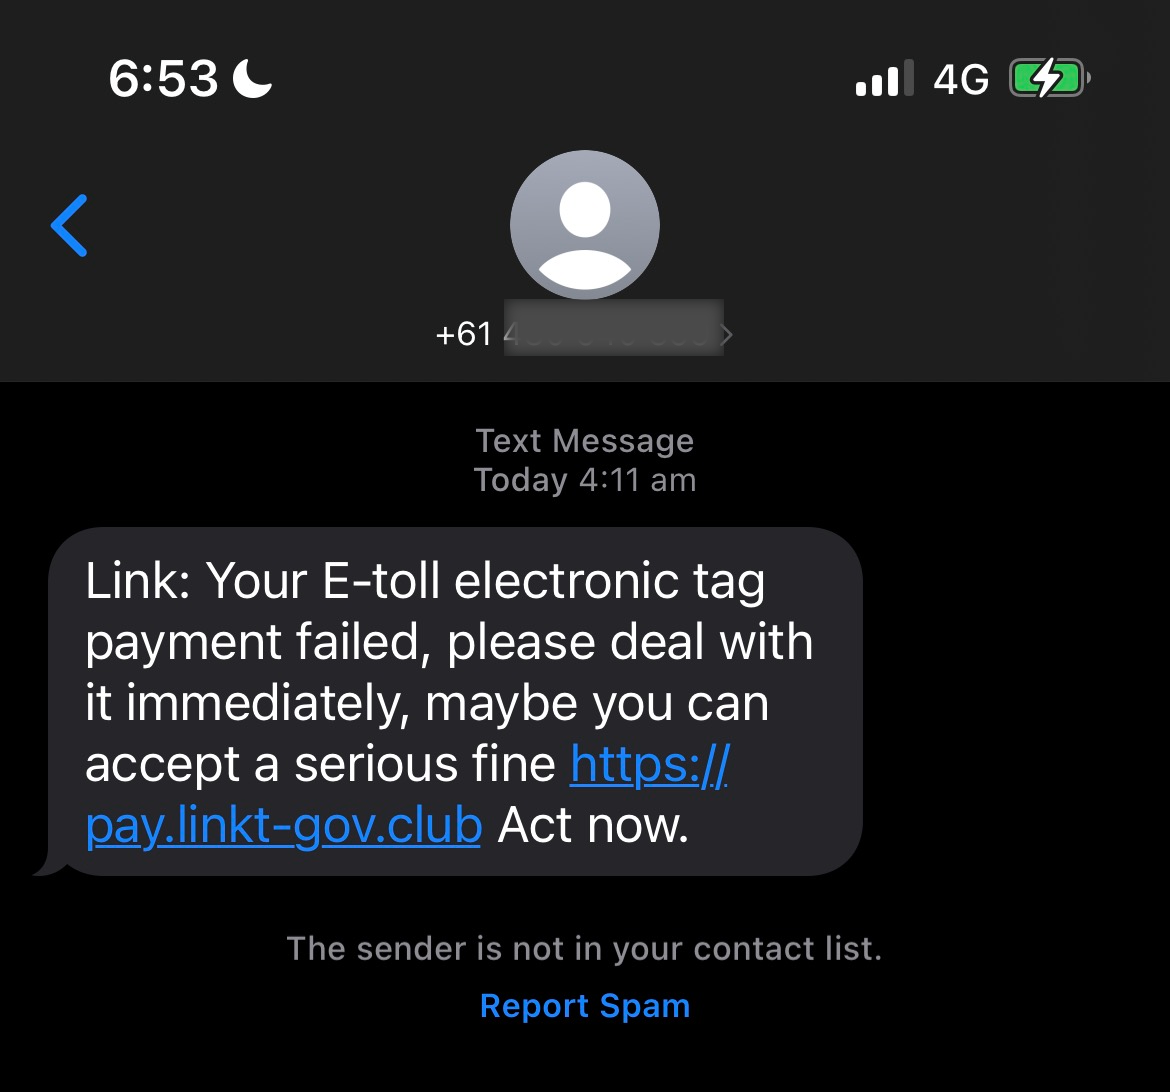 text message saying E-toll electronic tag payment has failed but using a url that linkt does not authorise and using the Act Now call to action